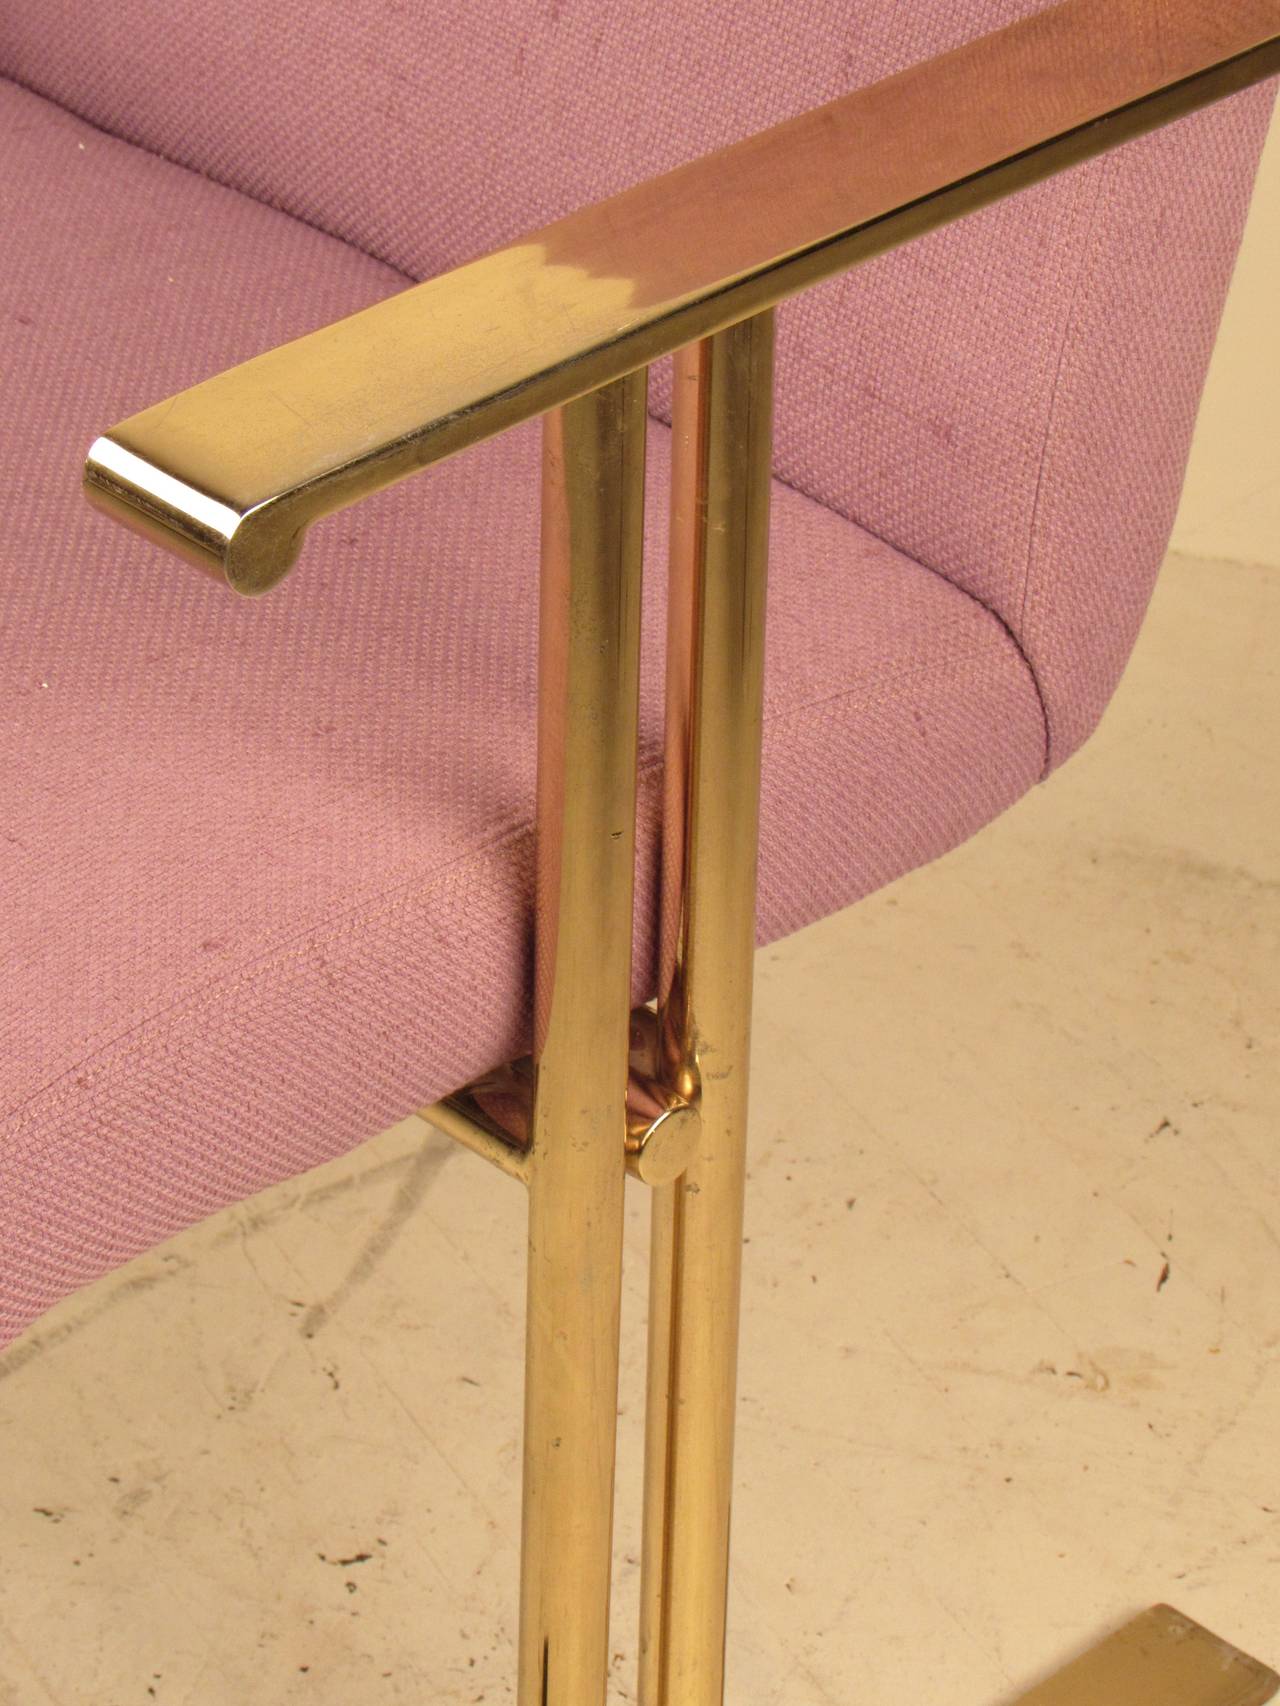 Stunning brass armchair or desk chair with sled base made by Directional. We have 3 of these available.

Brass is in great vintage condition with only minor wear and are in above average condition for age, use and material. The nubby lavender wool